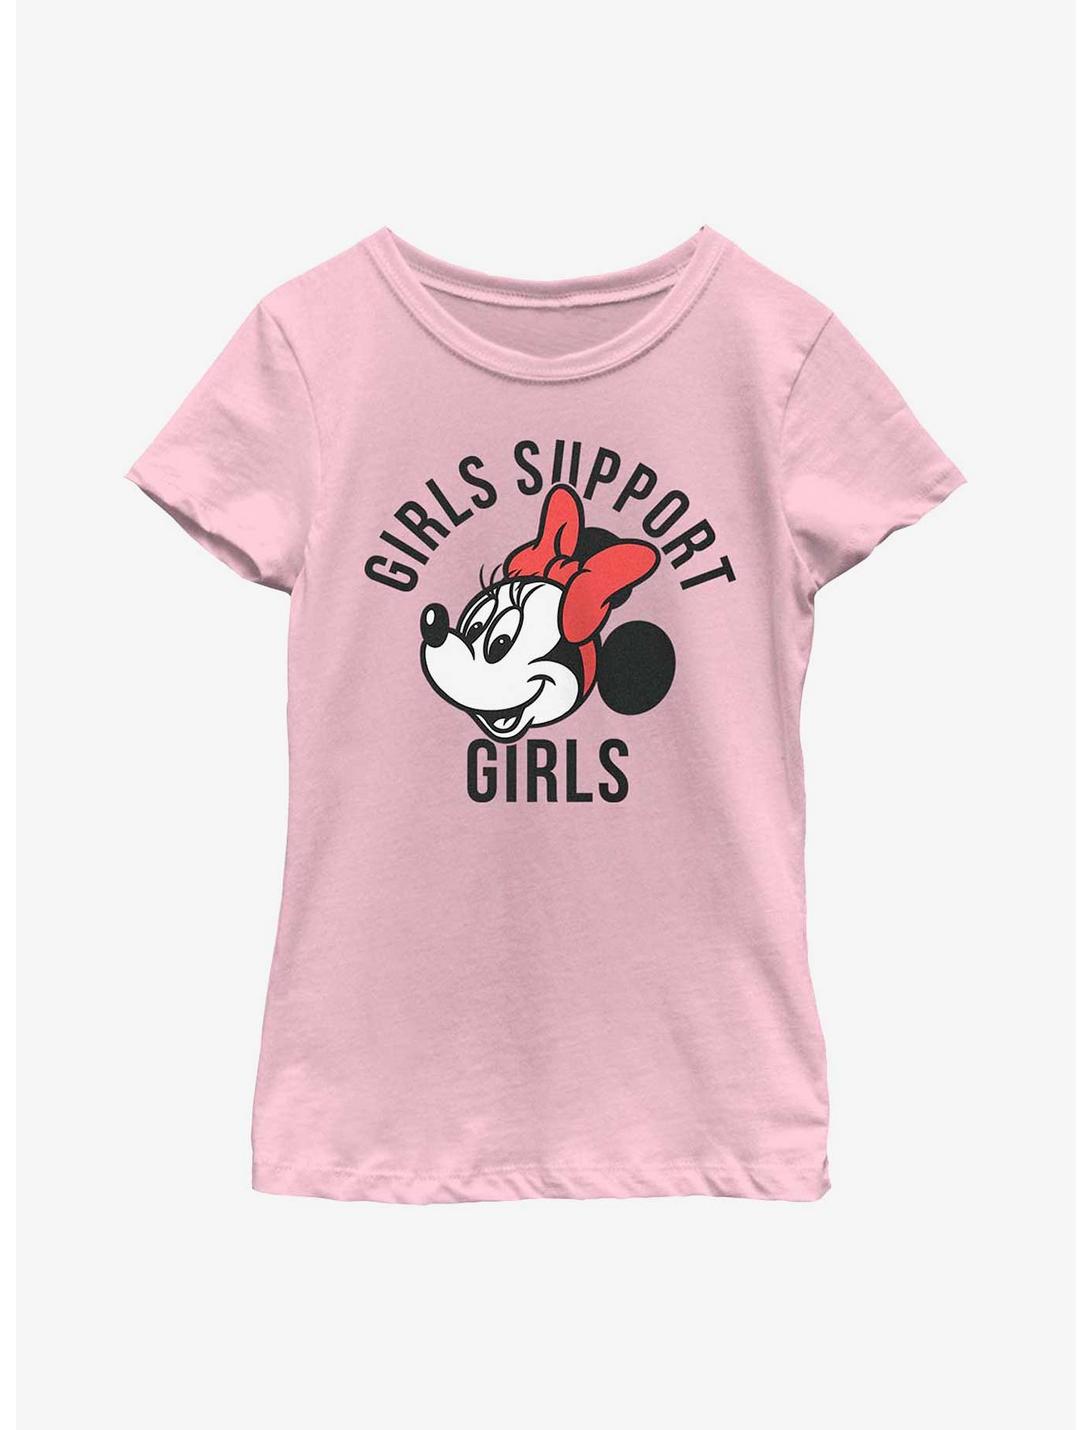 Disney Minnie Mouse Girls Support Girls Youth Girls T-Shirt, PINK, hi-res